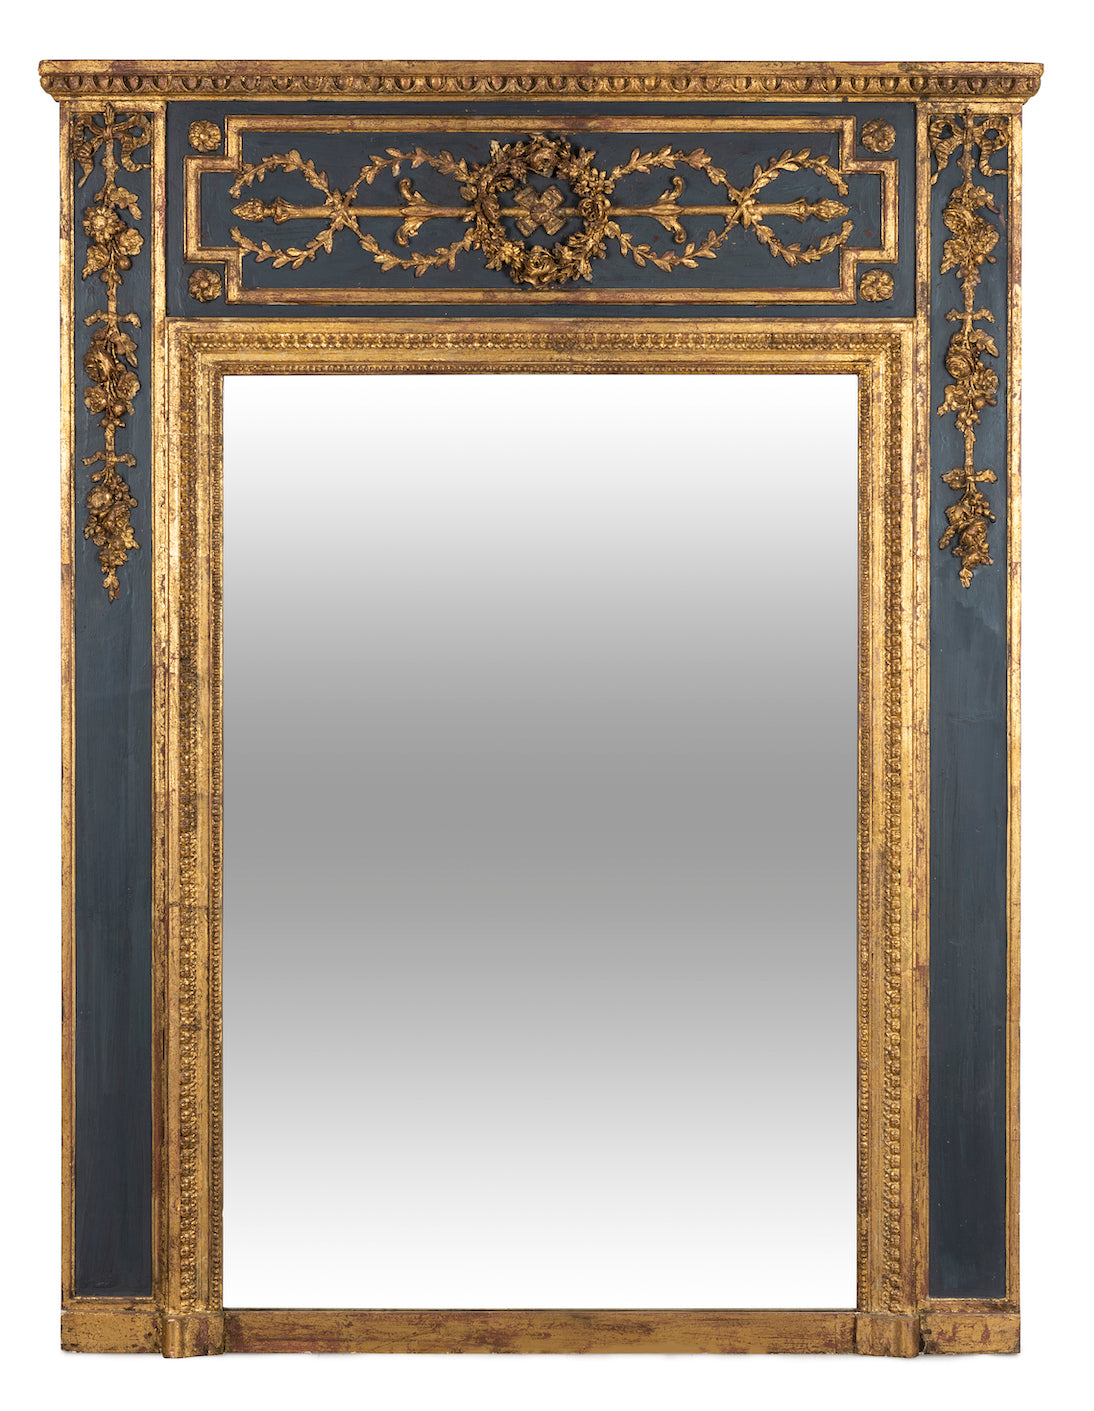 SOLD A finely carved grey painted and gilded overmantel mirror, French 19th Century